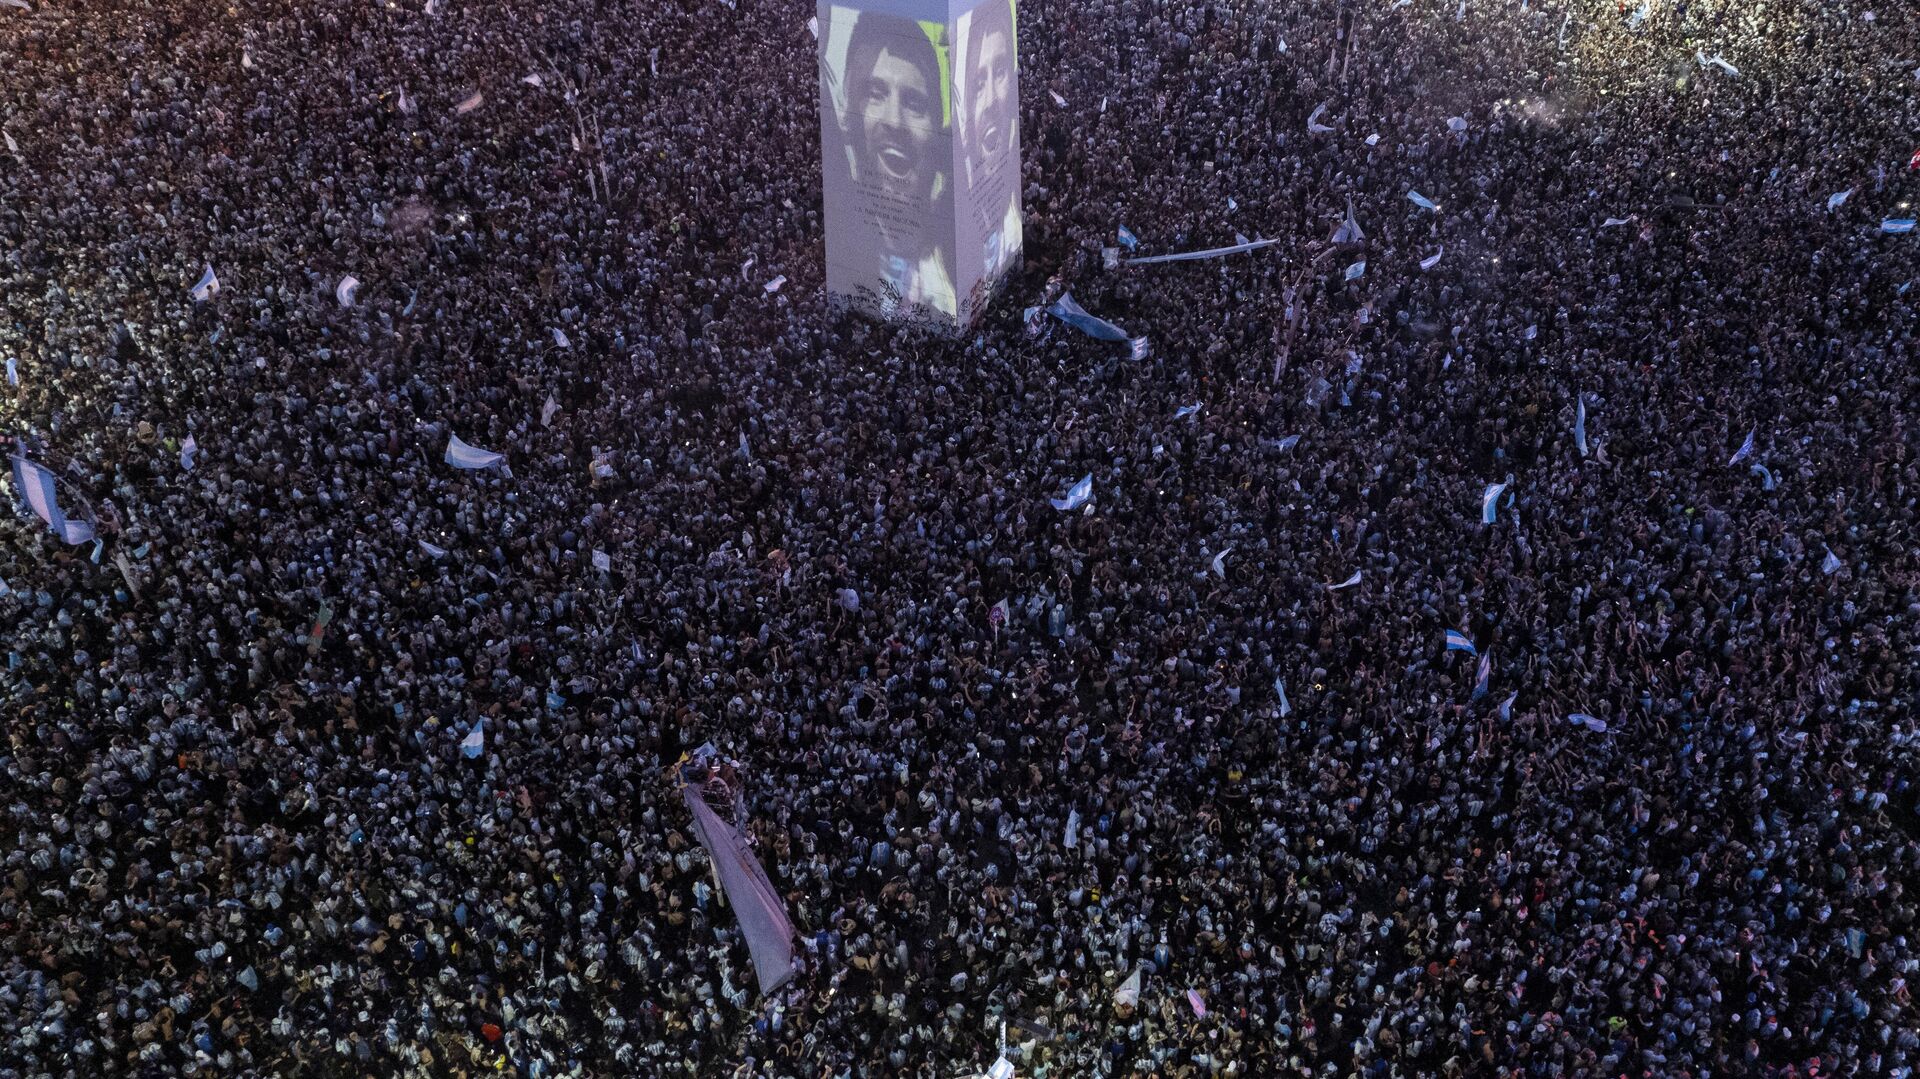 Tha face of Argentina's striker Lionel Messi is projected on the capital's Obelisk as fans celebrate their team's World Cup victory over France in Buenos Aires, Argentina, Sunday, Dec. 18, 2022. - Sputnik India, 1920, 19.12.2022